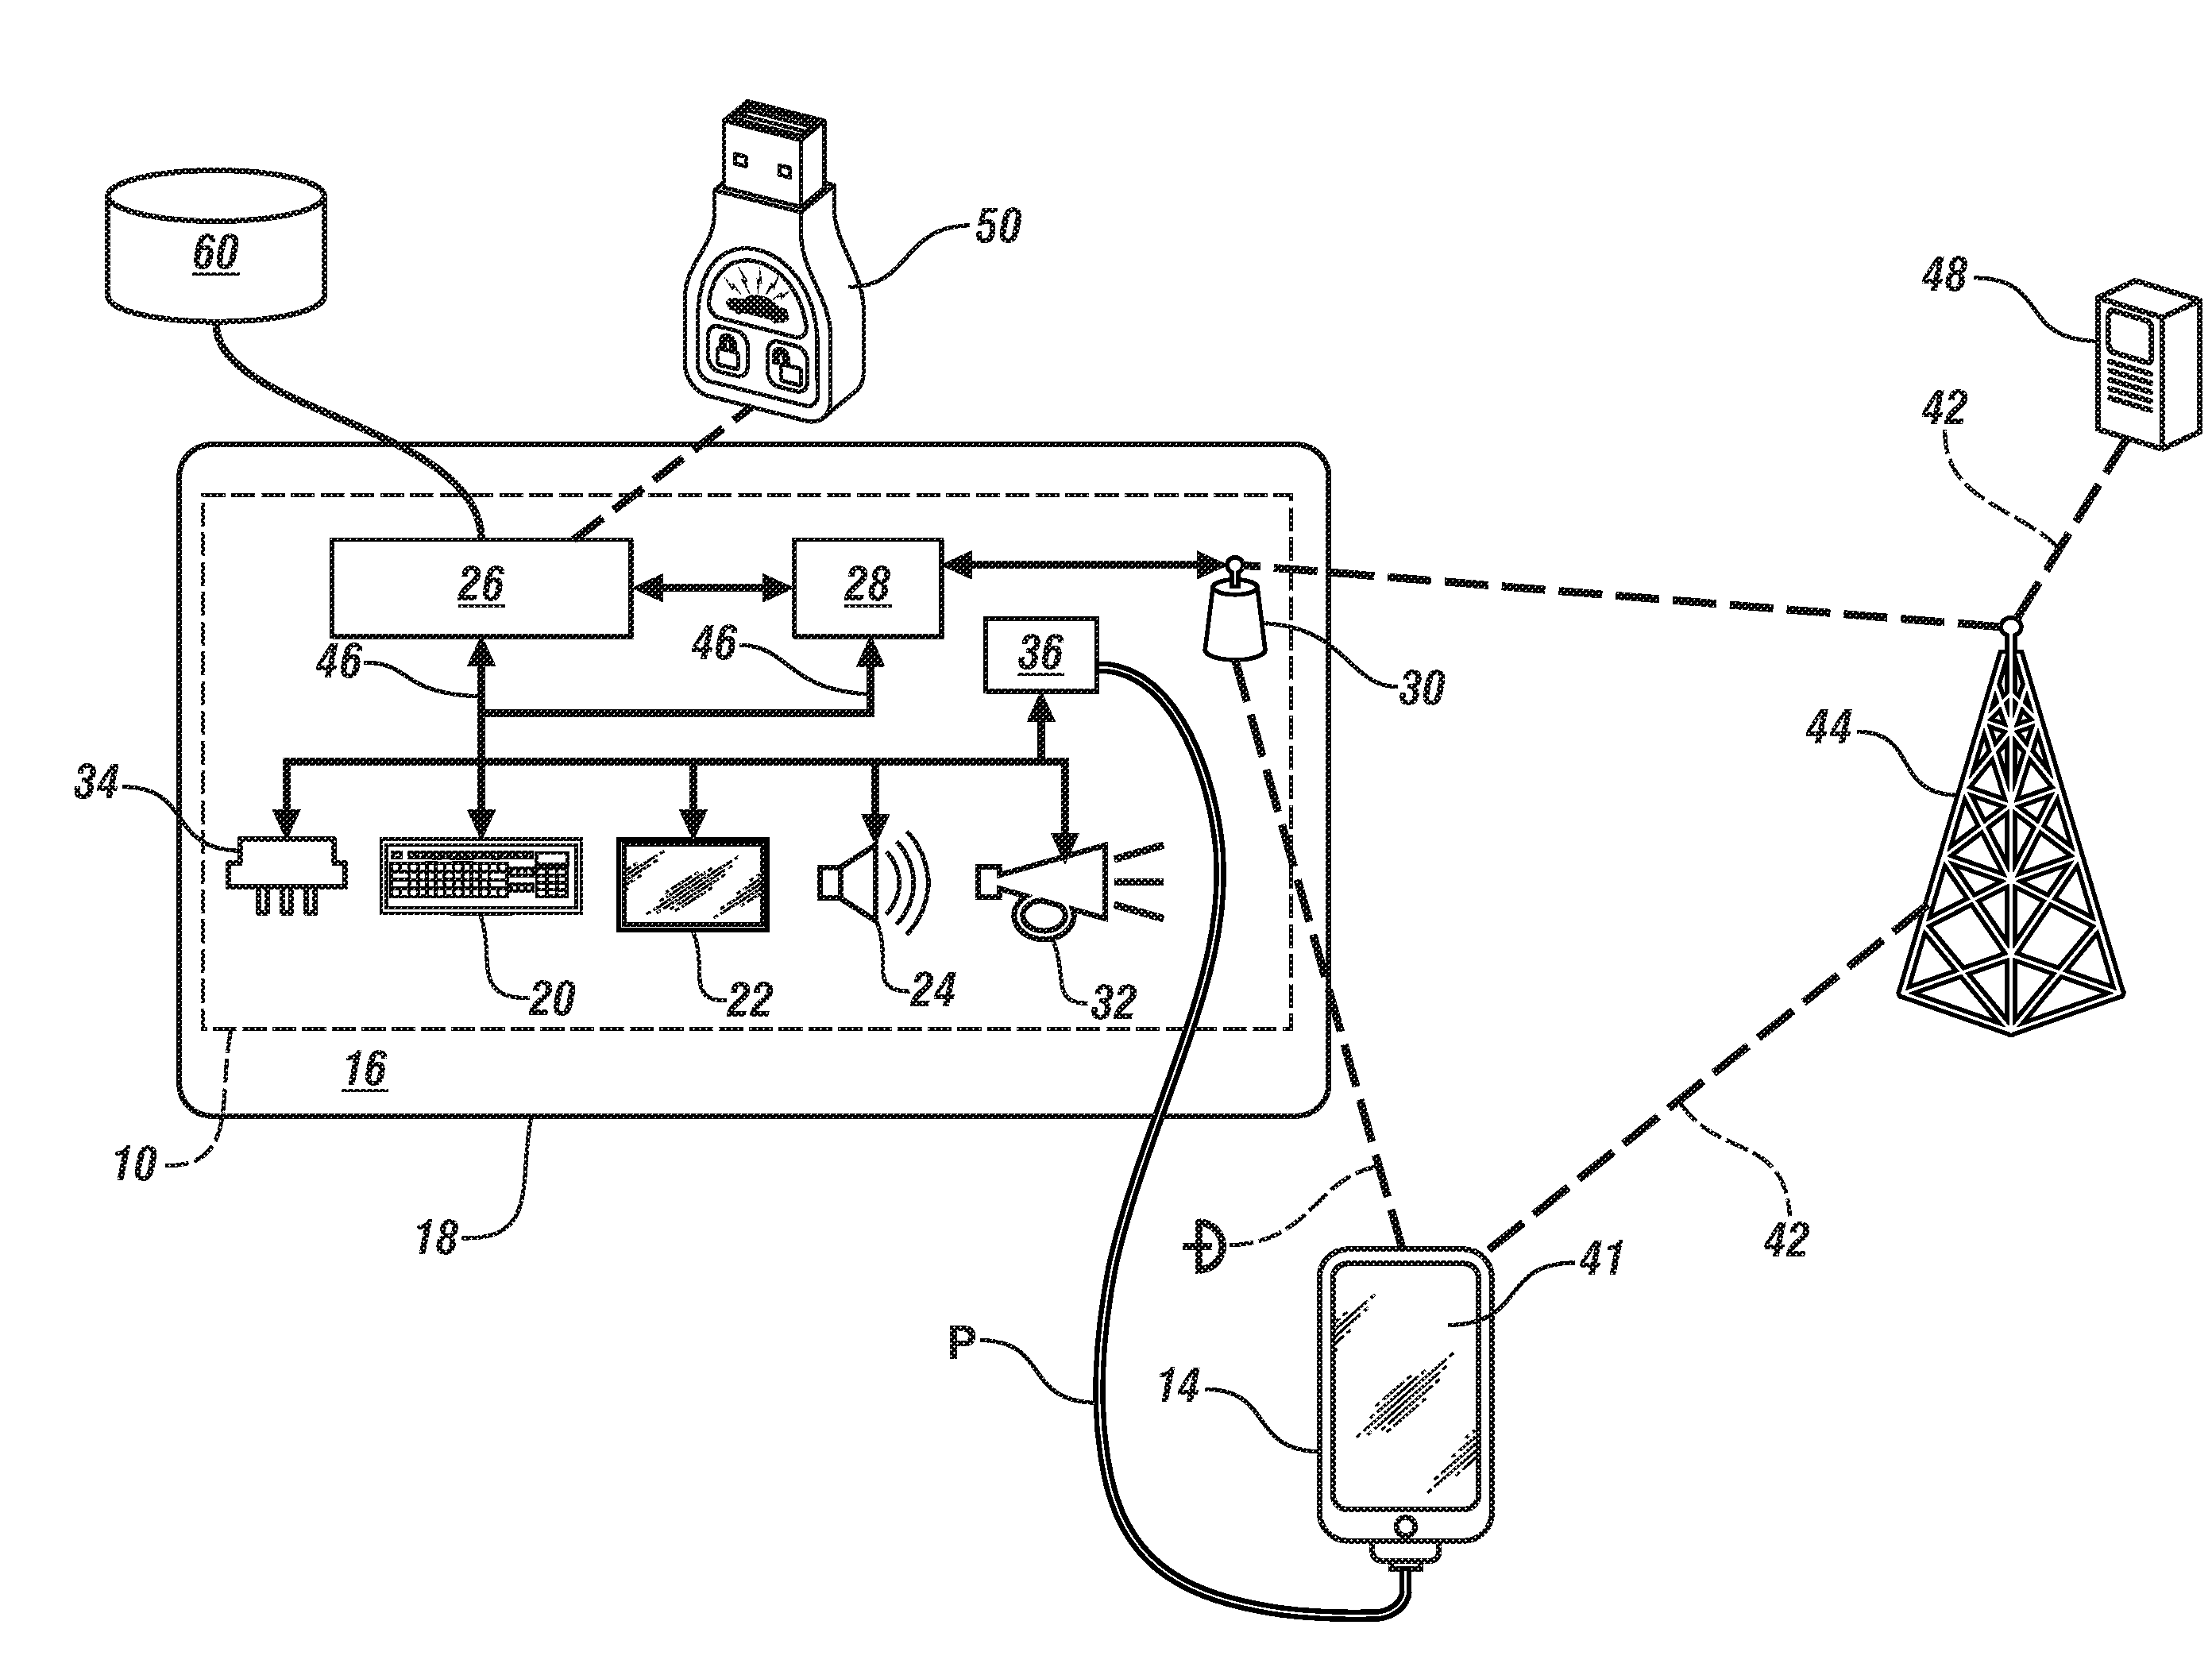 System for providing a reminder to remove a mobile electronic device from a vehicle